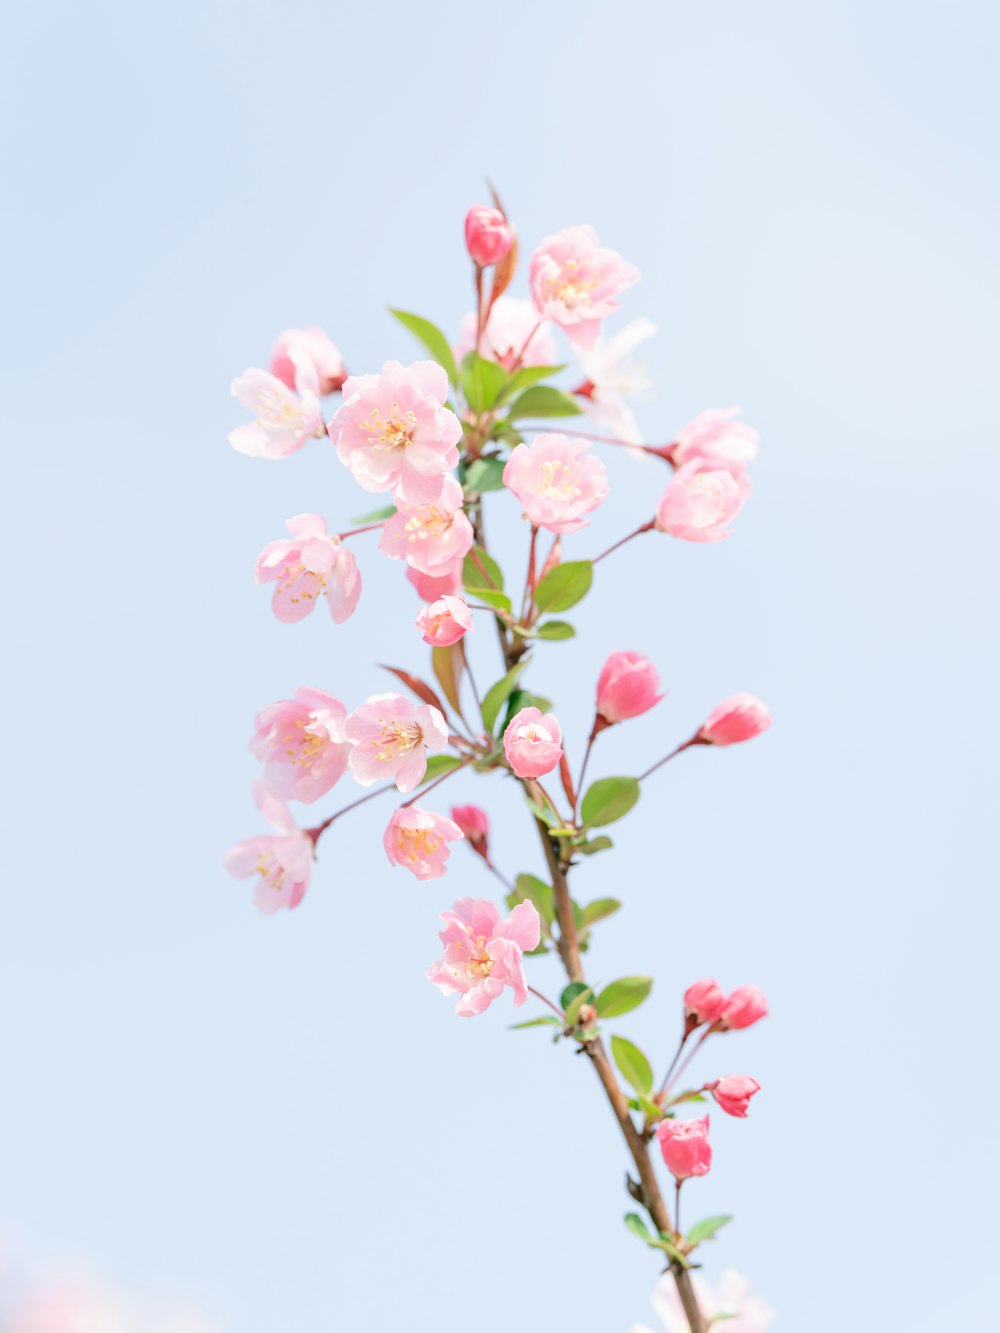 a branch of pink flowers against a blue sky